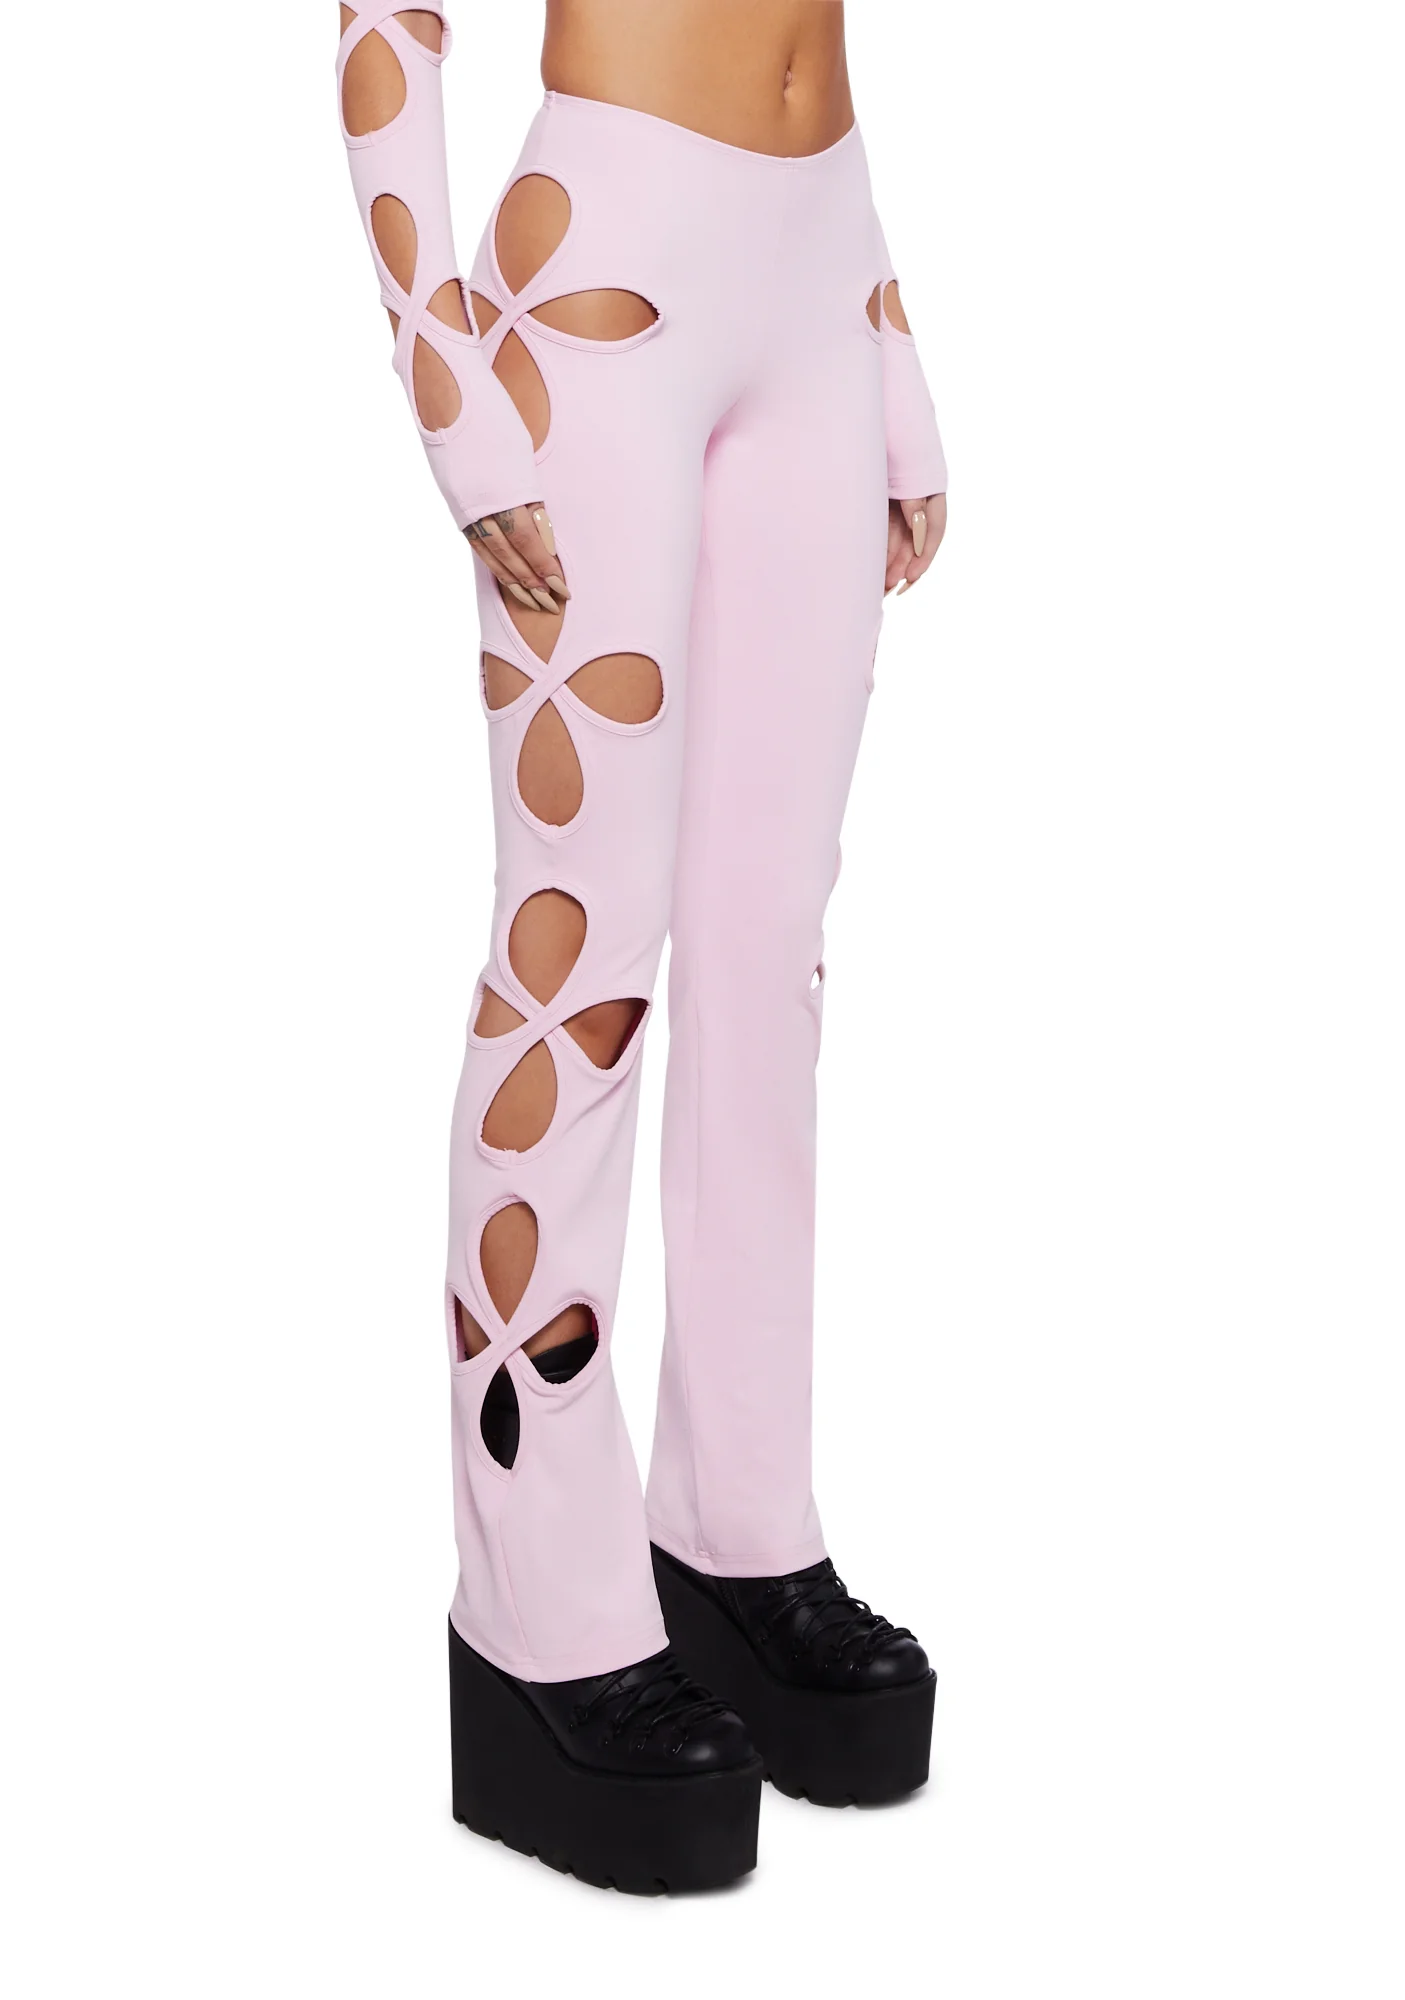 Club Exx Star Child Cut-Out Pants - Pink